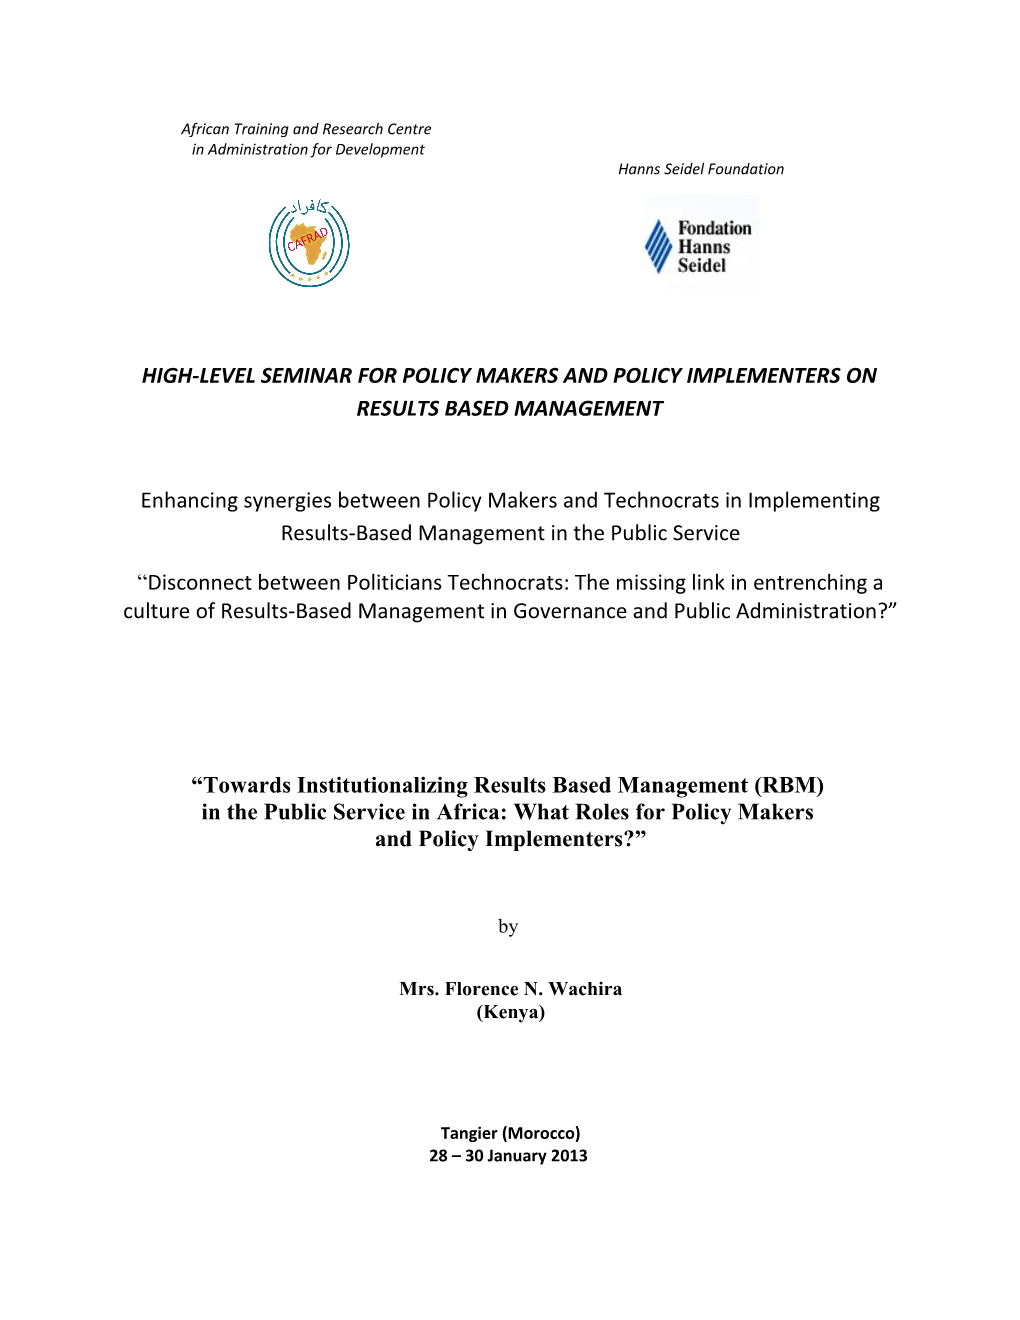 Towards Institutionalizing Results Based Management (Rbm) in the Public Service in Africa